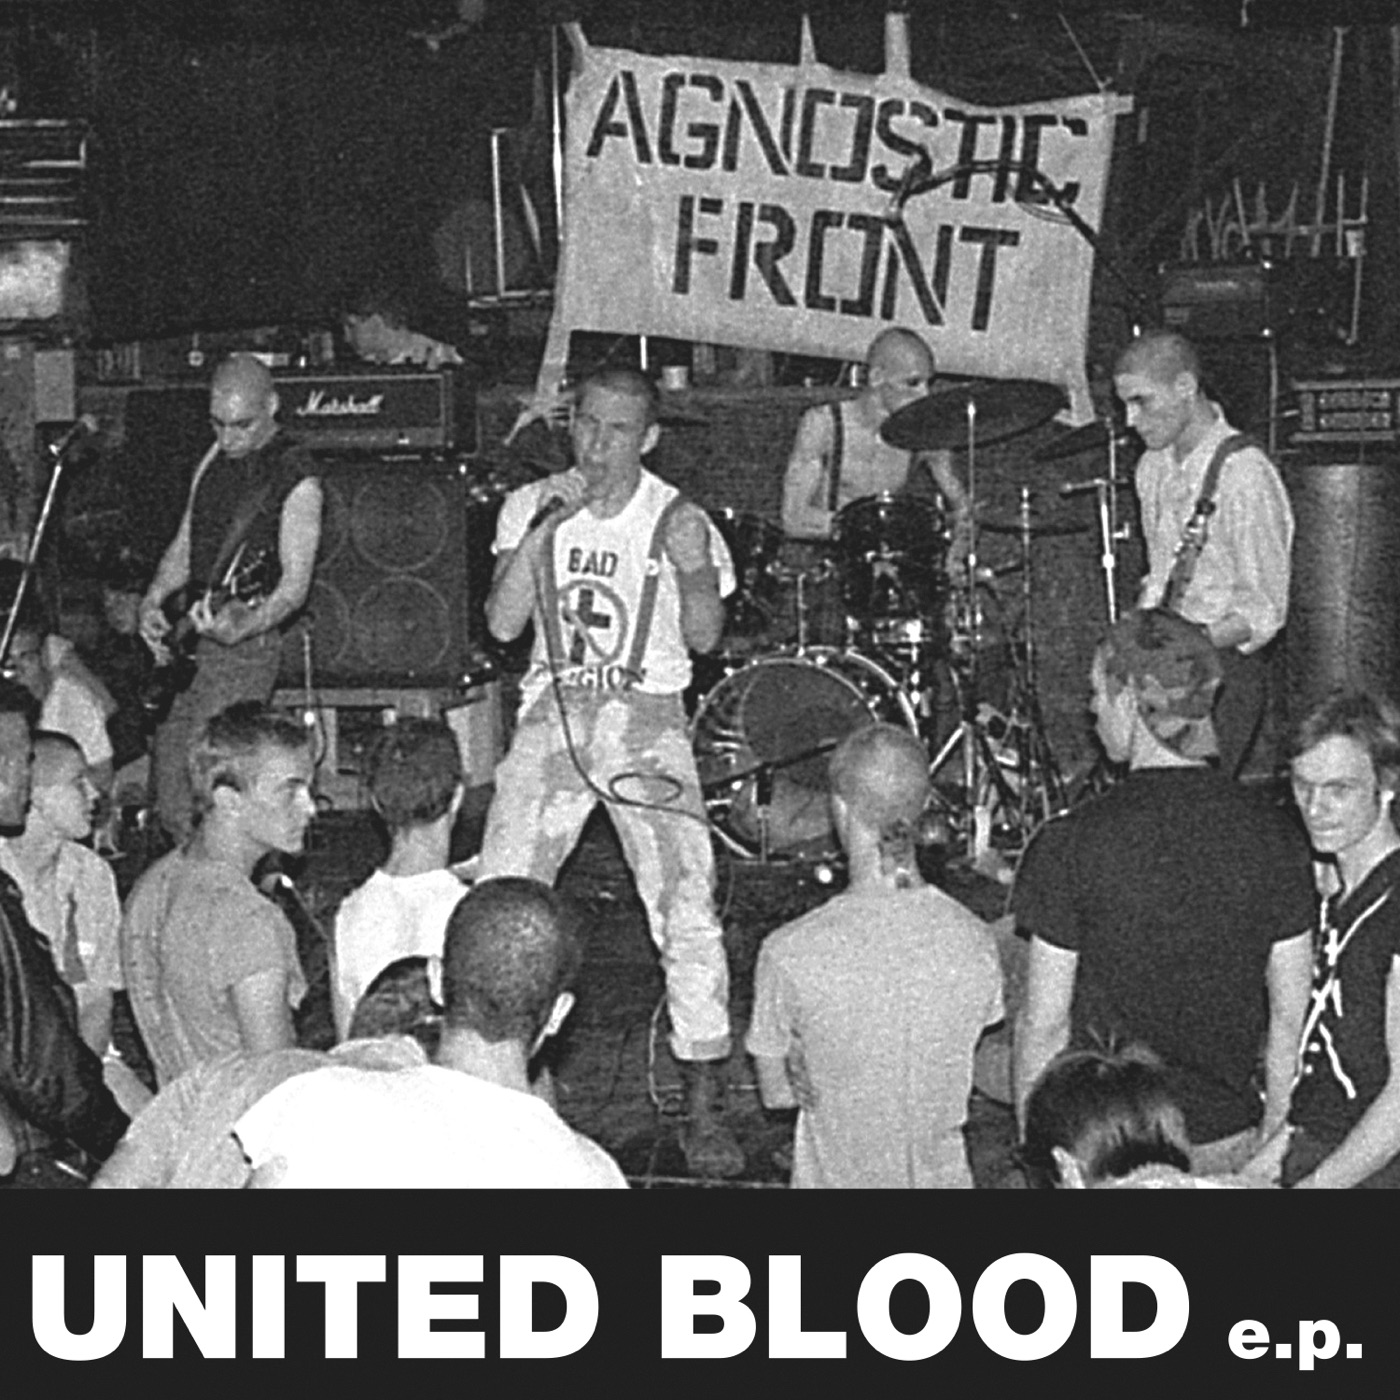 United Blood e.p by Agnostic Front